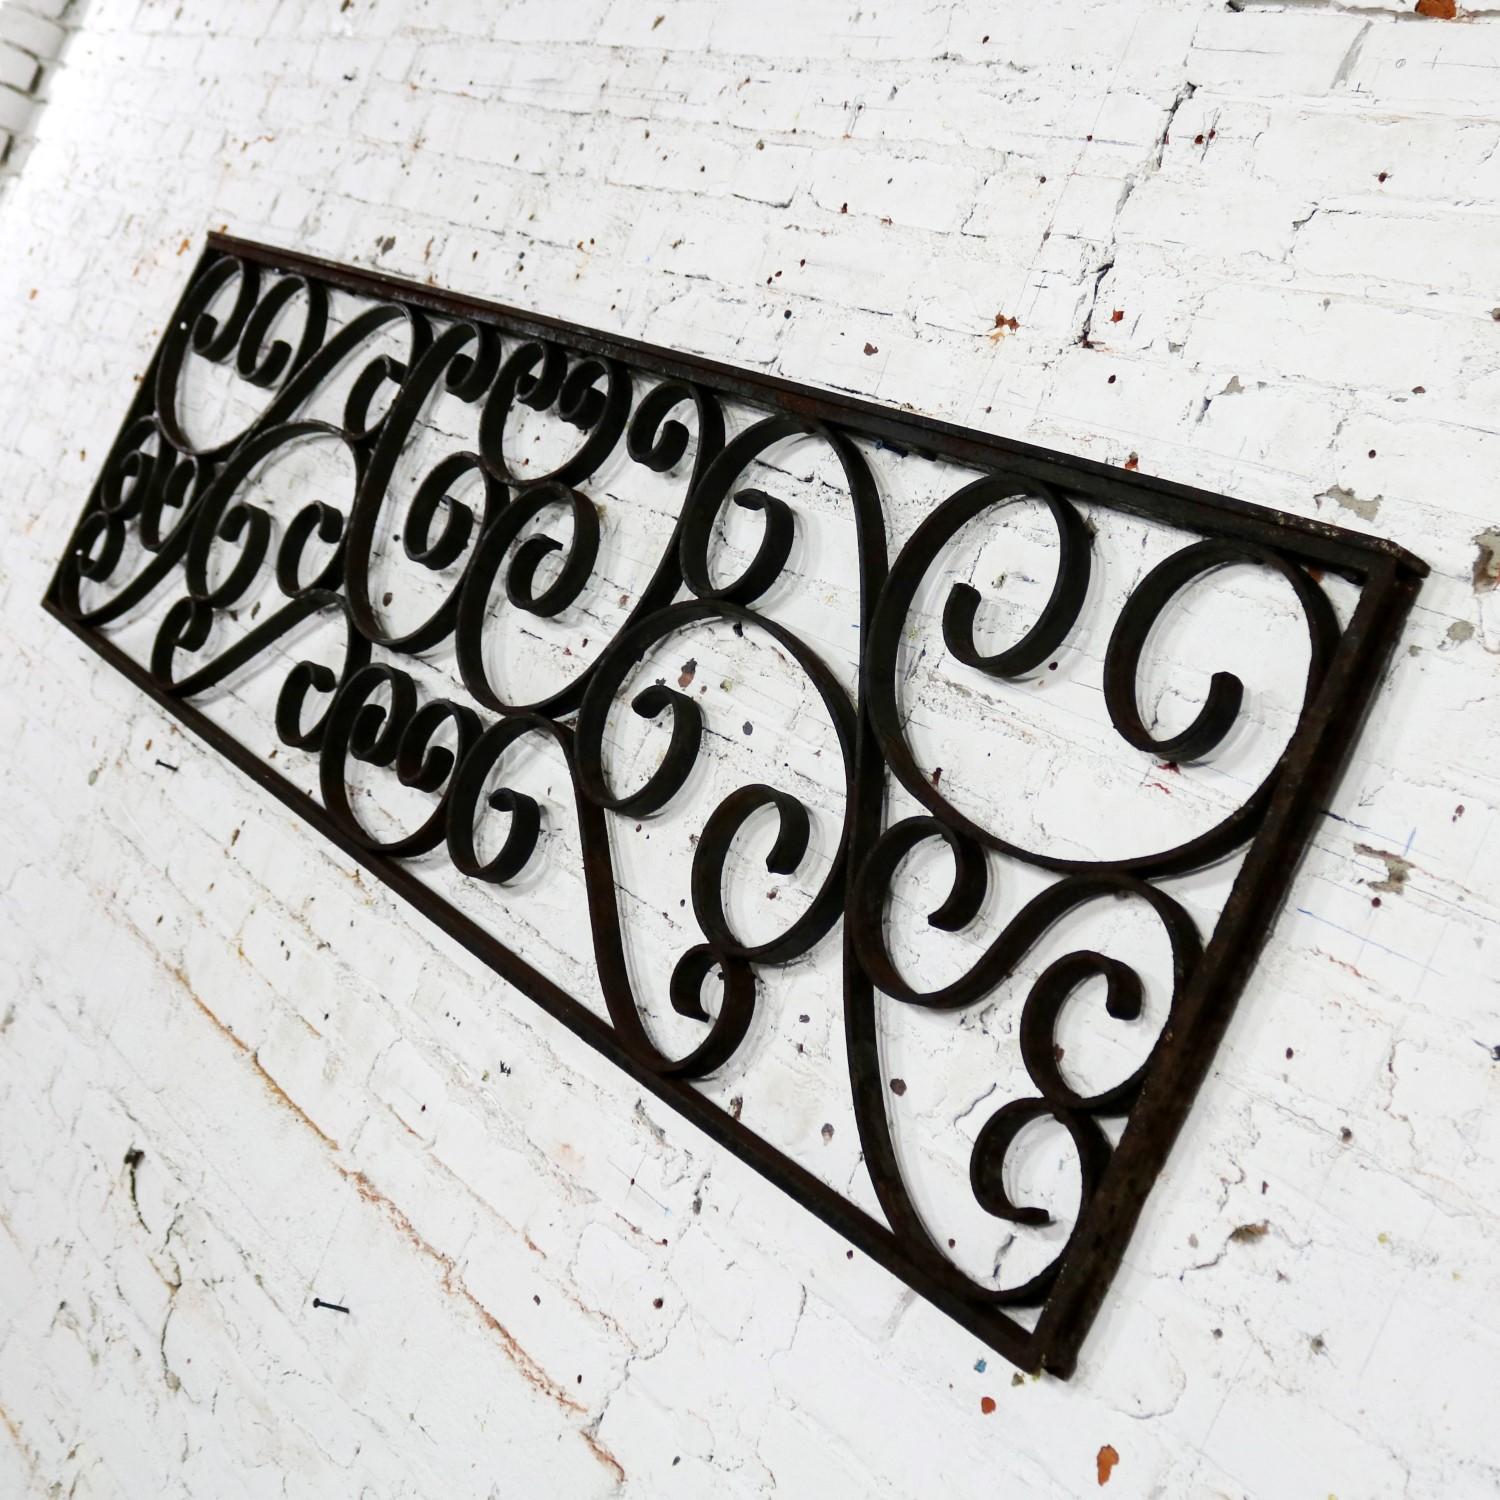 Antique Swirled Design Wrought Iron Railing Piece Trellis or Fence Section For Sale 4